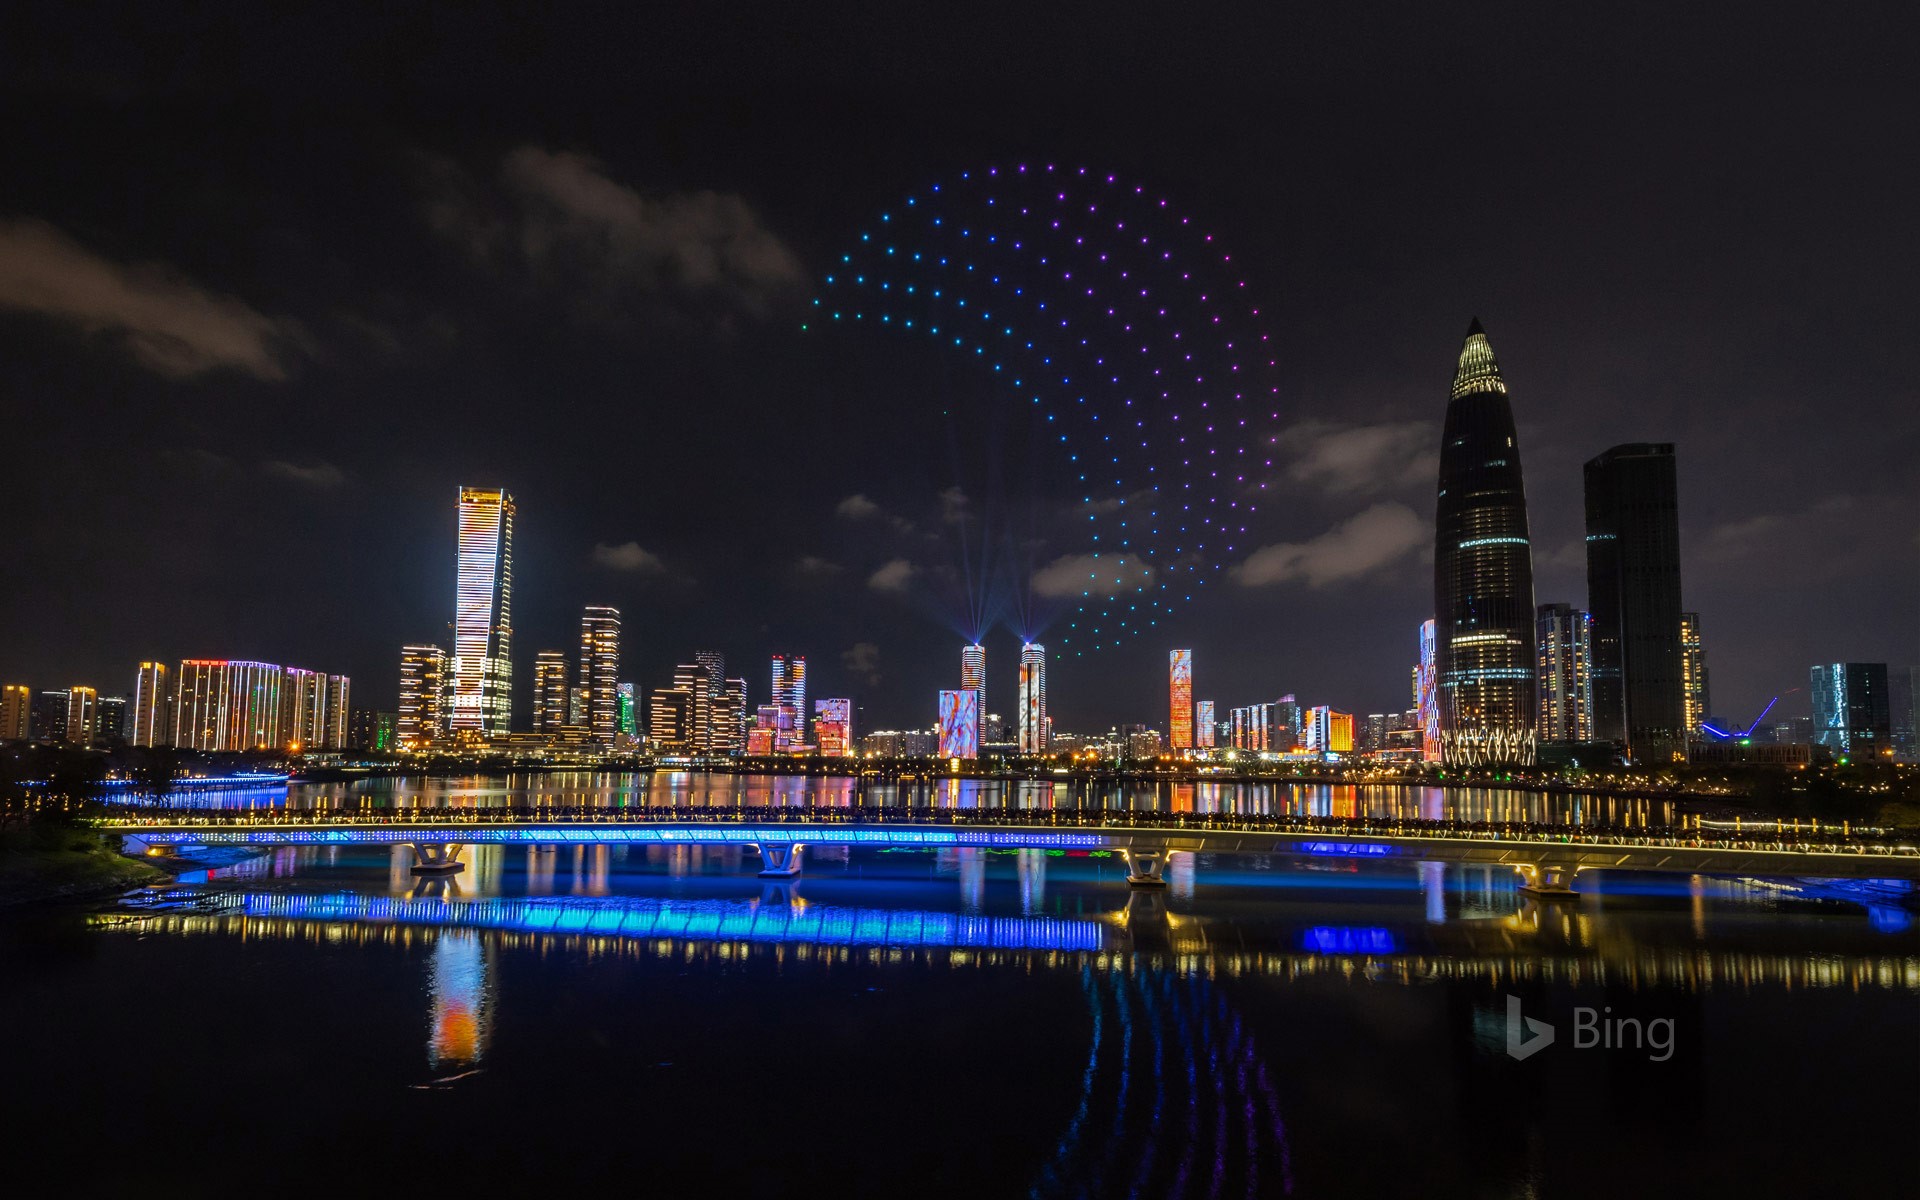 Drones light up the sky over Shenzhen, China